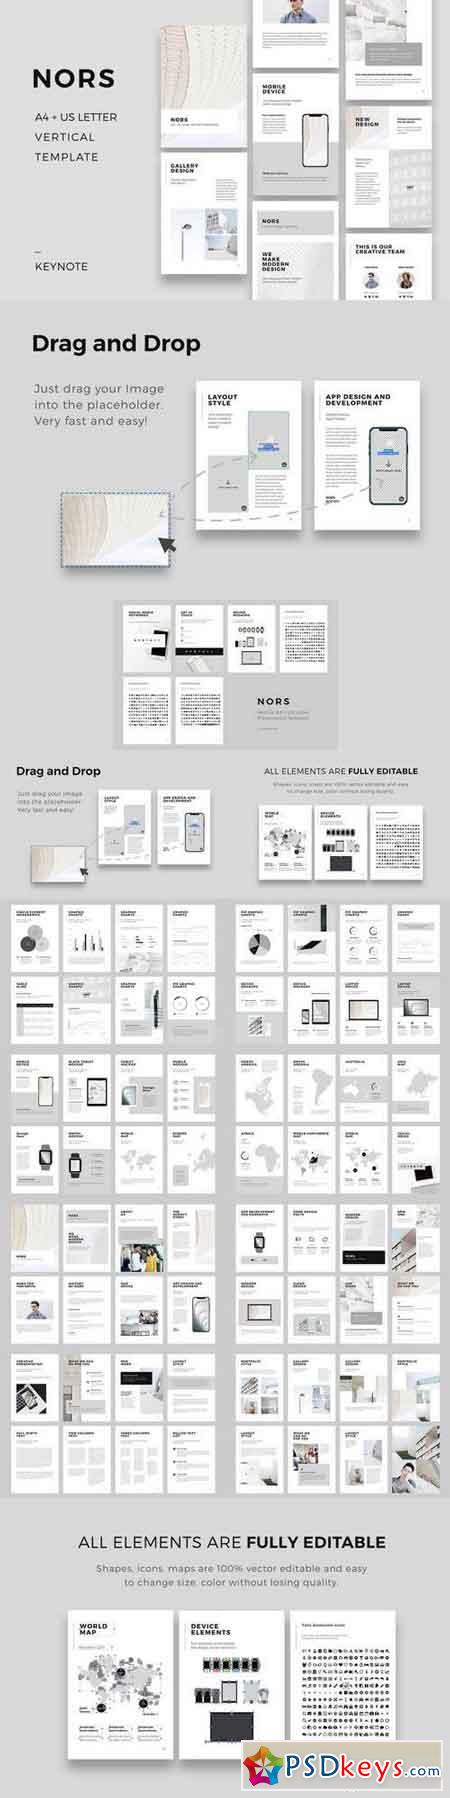 NORS A4 US Letter Vertical Keynote Template